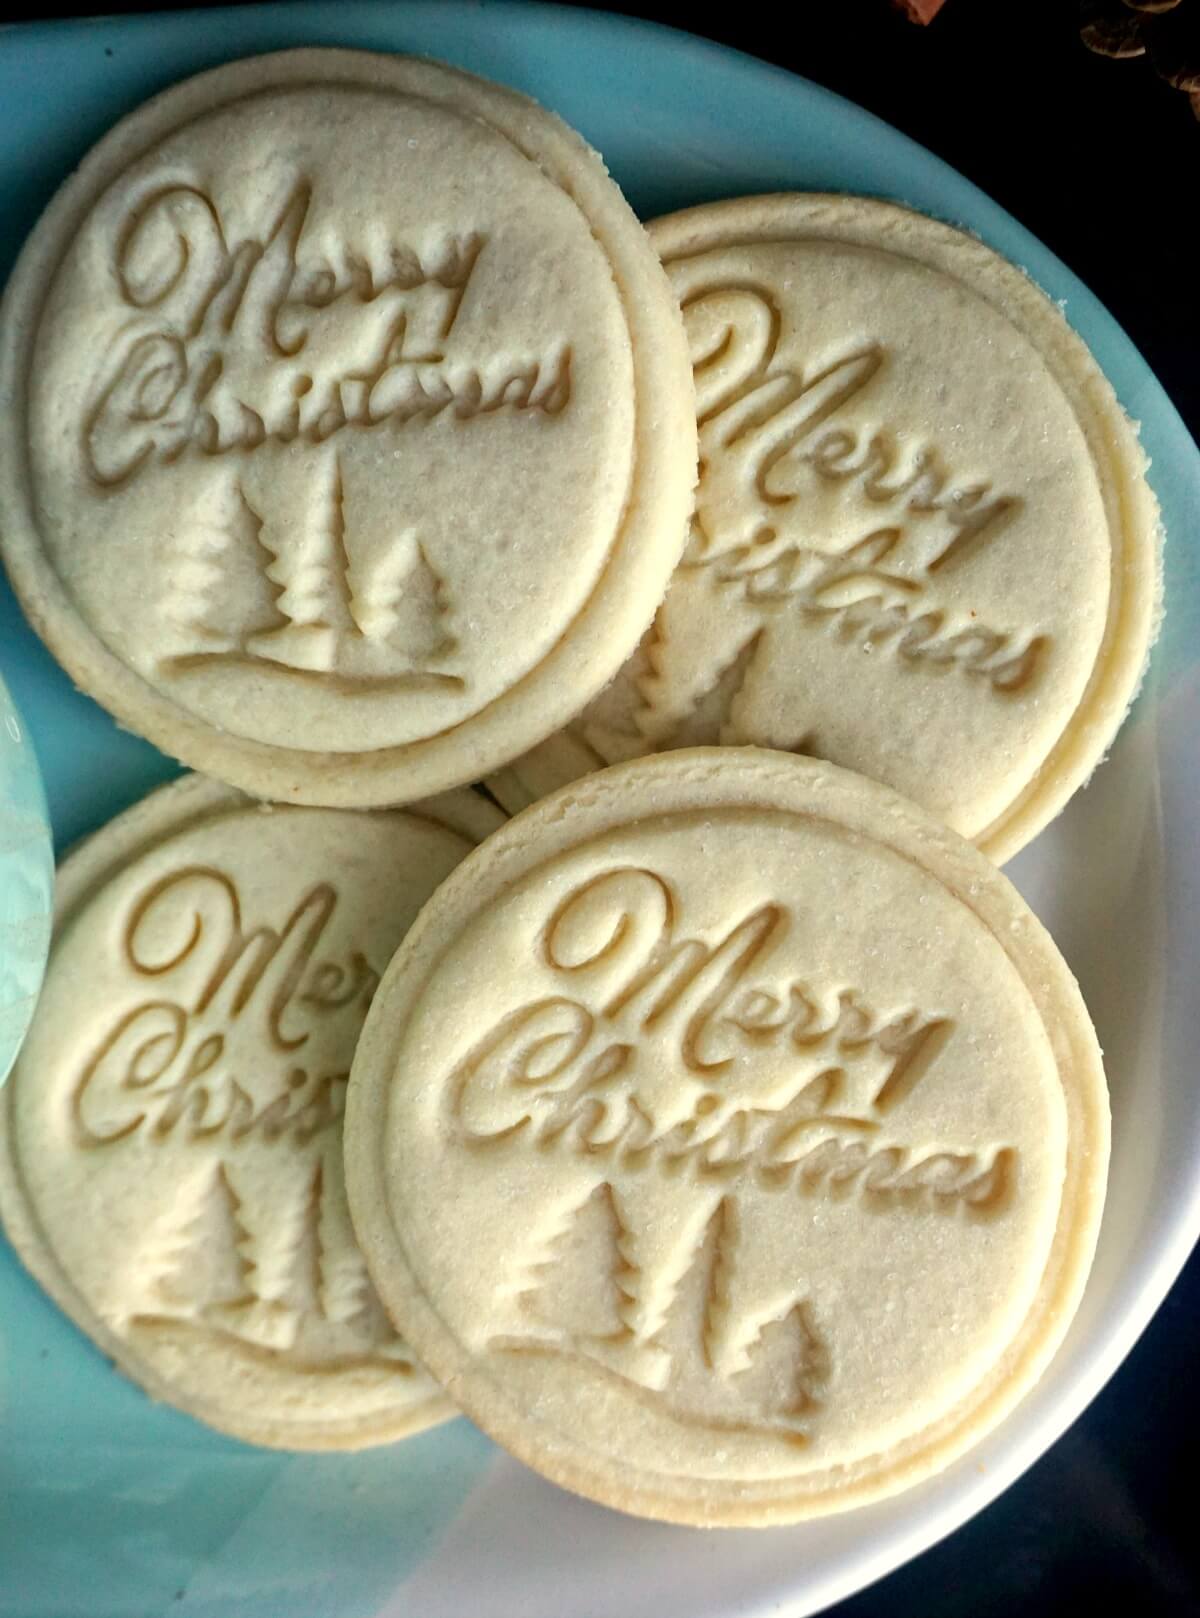 Close-up shoot of 4 stamped cookies.